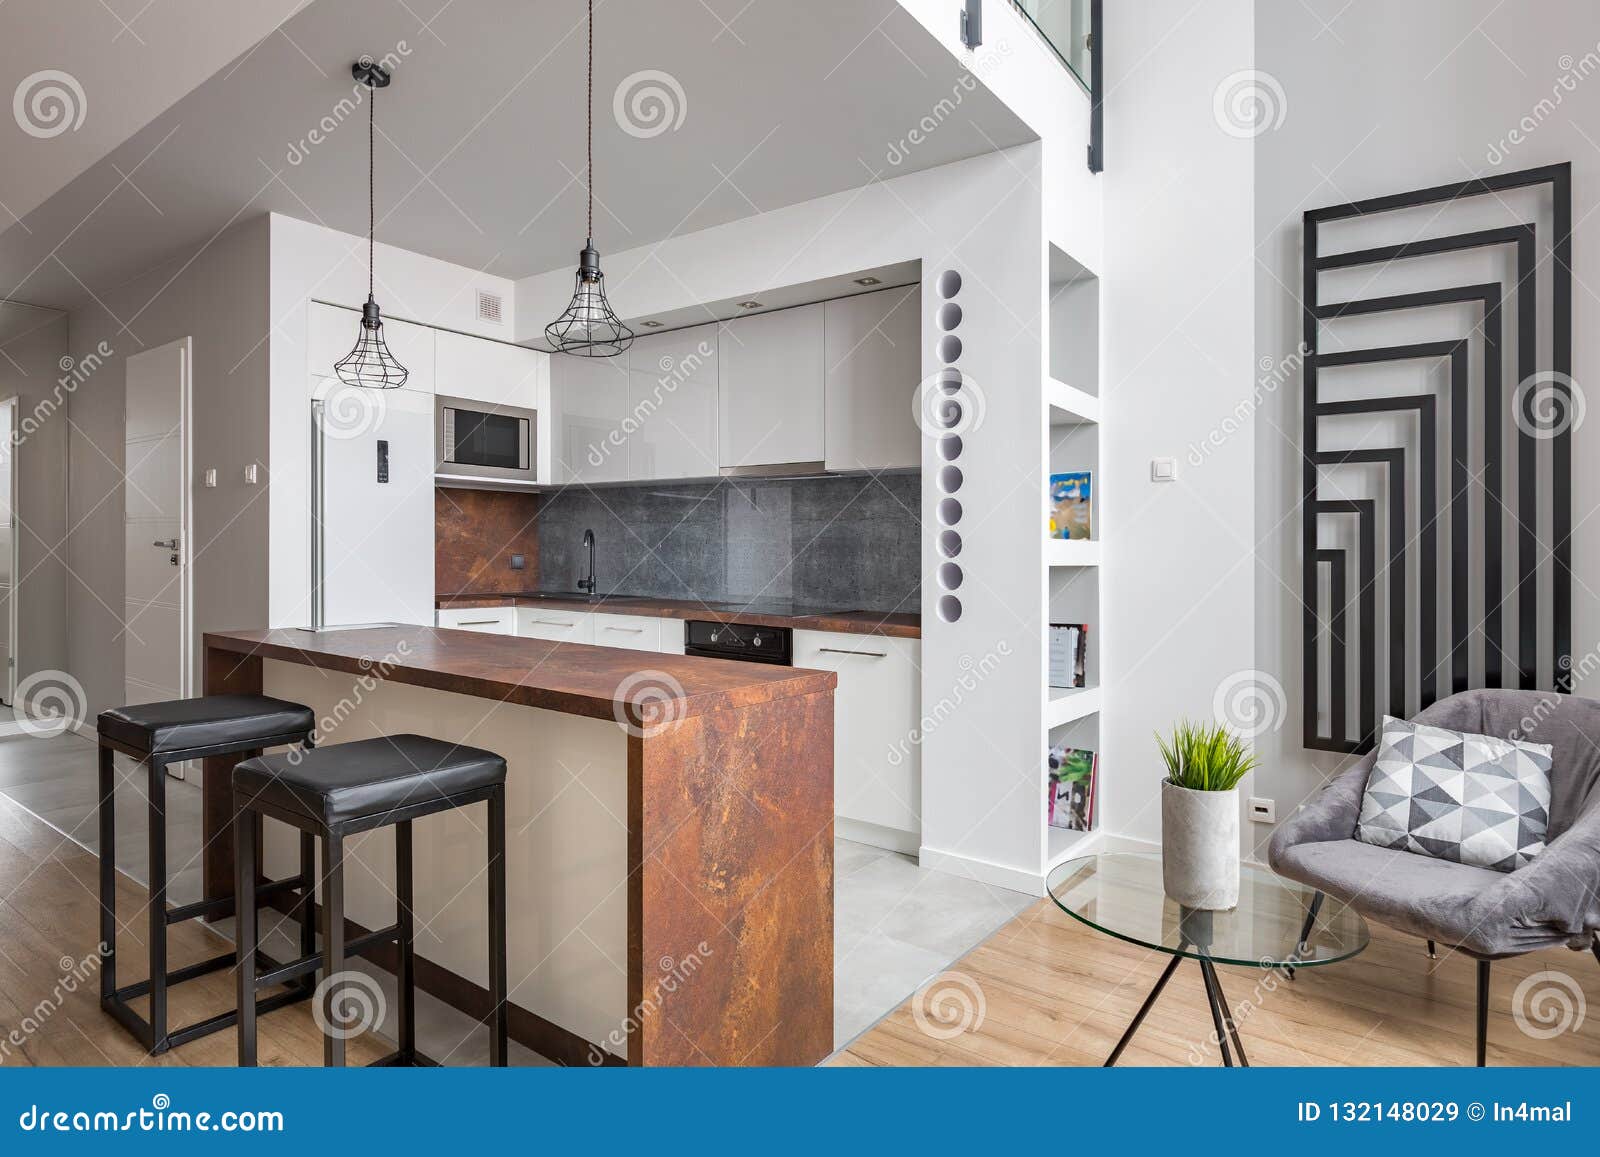 Apartment with Functional Open Kitchen Stock Image - Image of ...